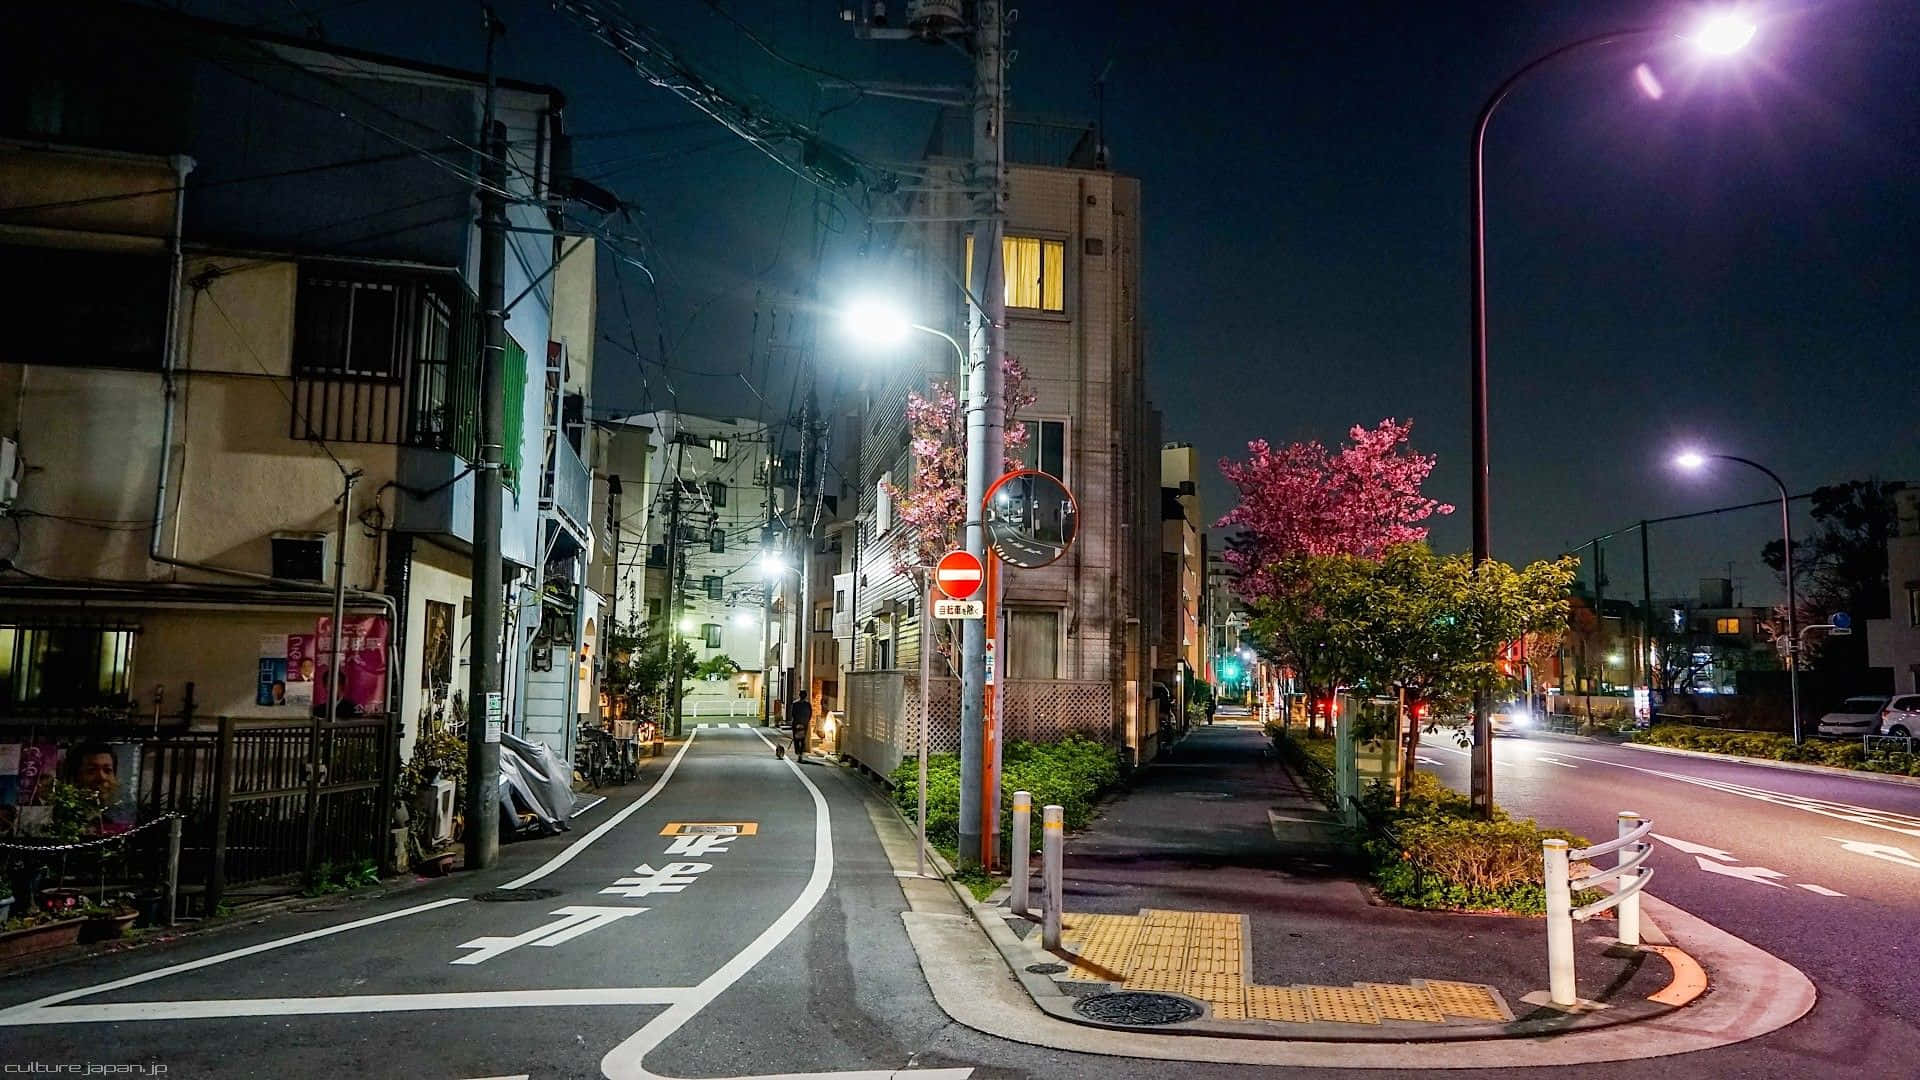 Street Lights On The Road In Japan